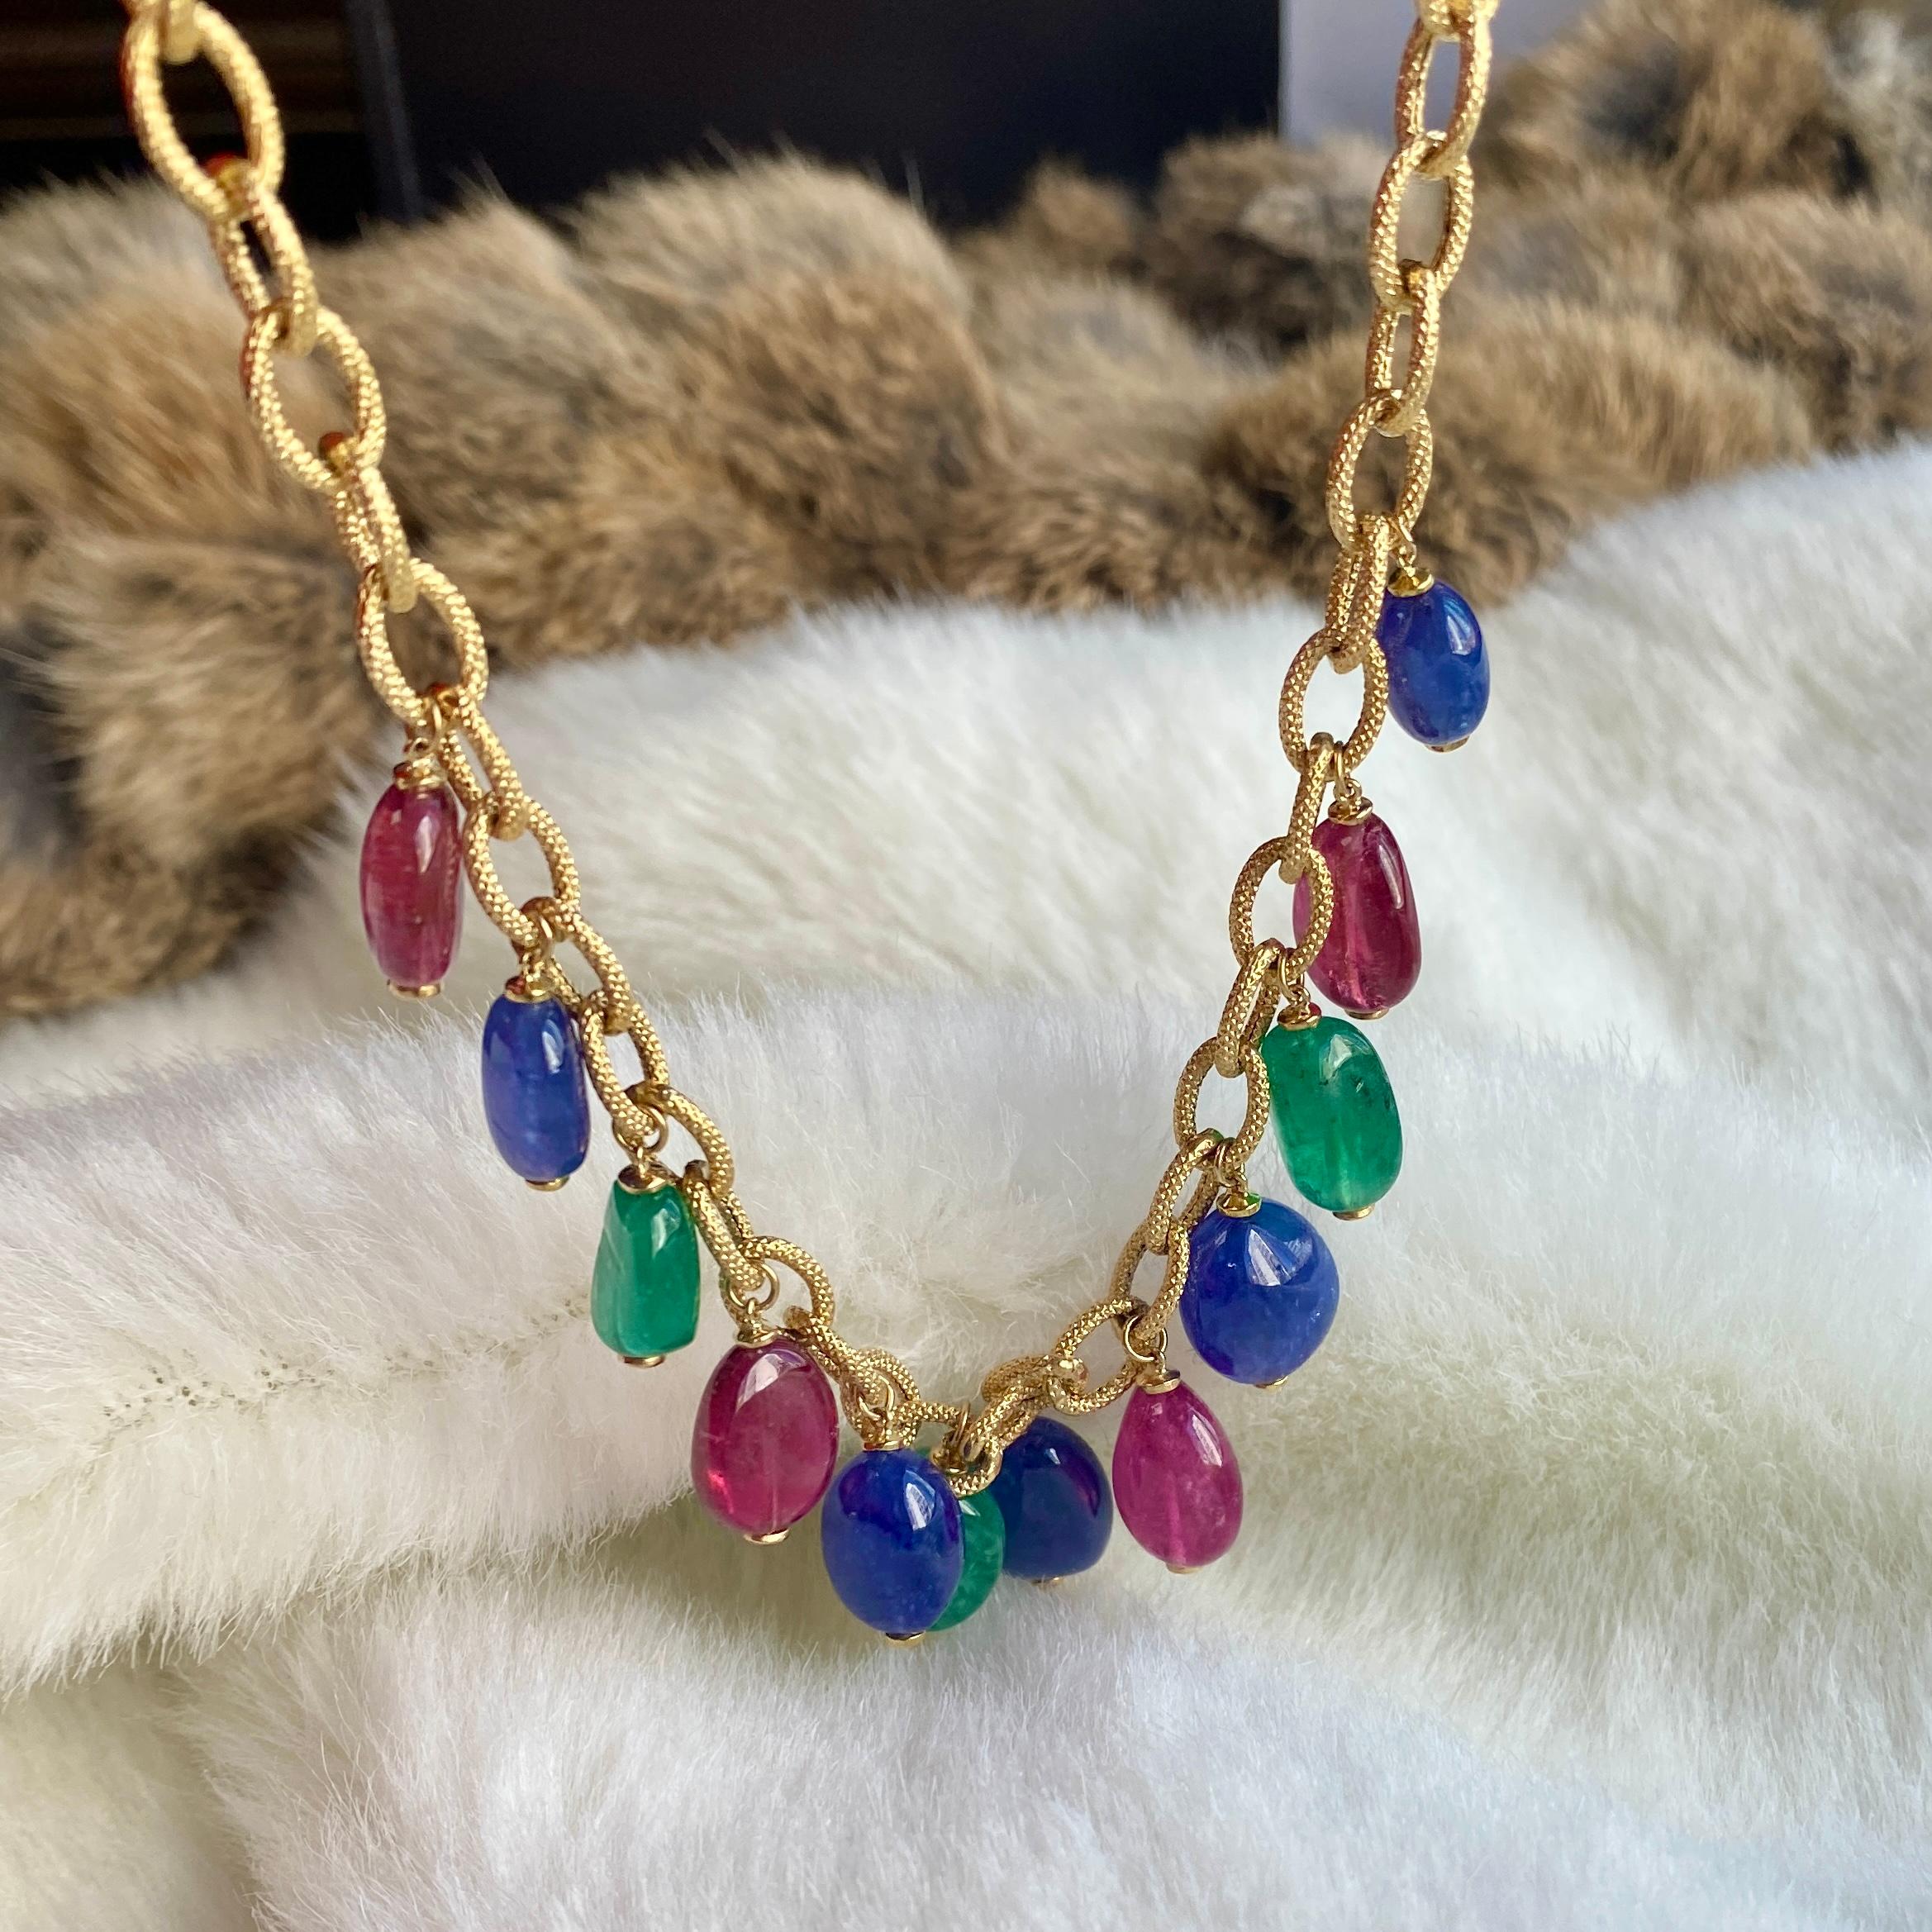 Emerald, Tanzanite and Rubelite Tumble Bead Frosted Chain Necklace in 18K Yellow Gold form 'G-One' Collection

Gemstone Weight: 105 Carats

Length: 16